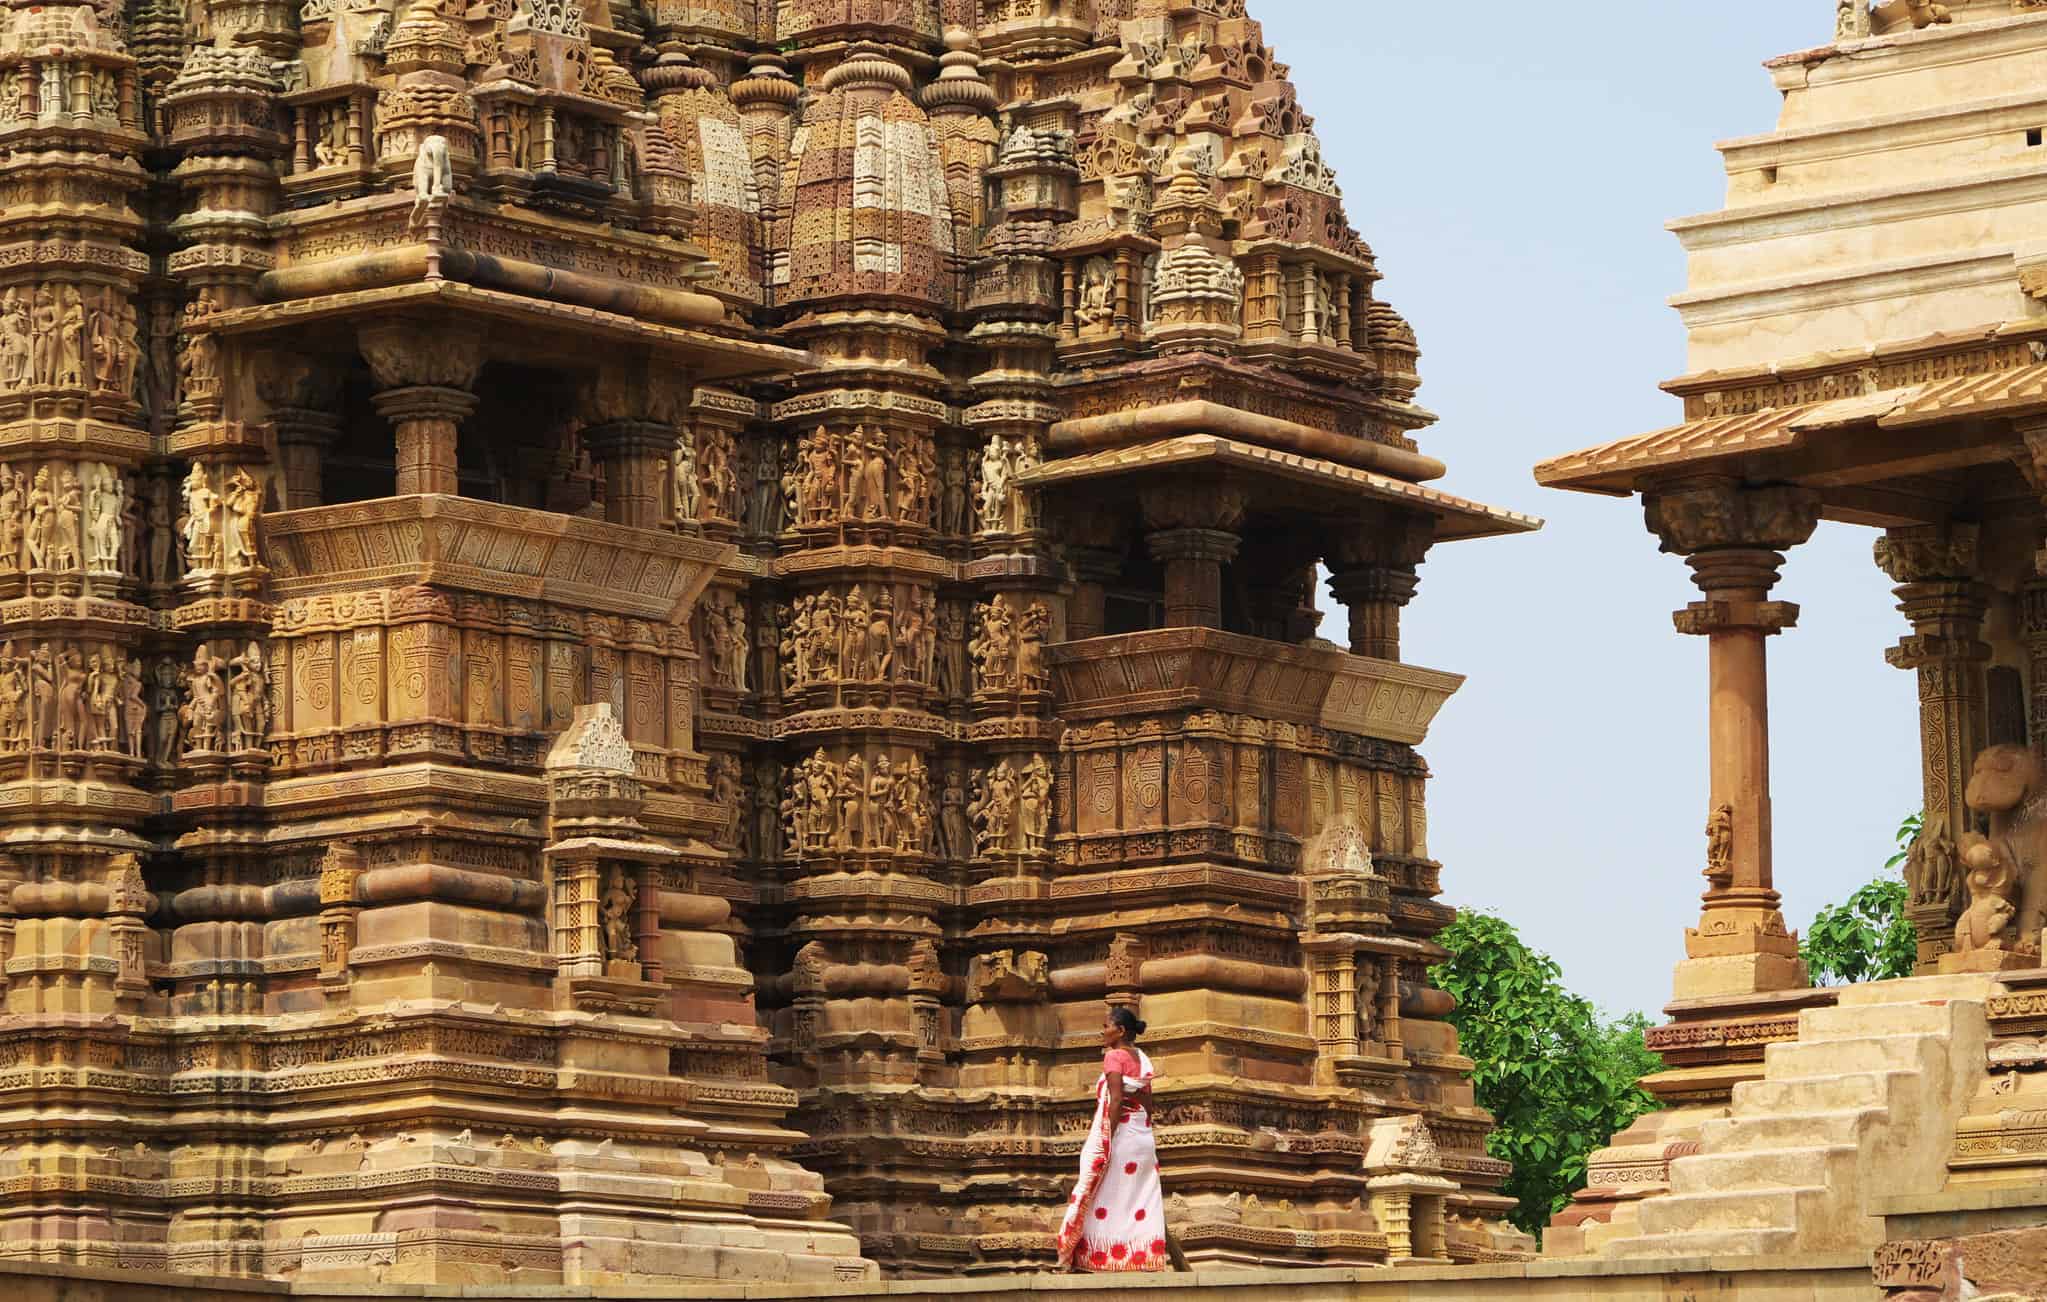 Western temples in Khajurao with erotic carvings